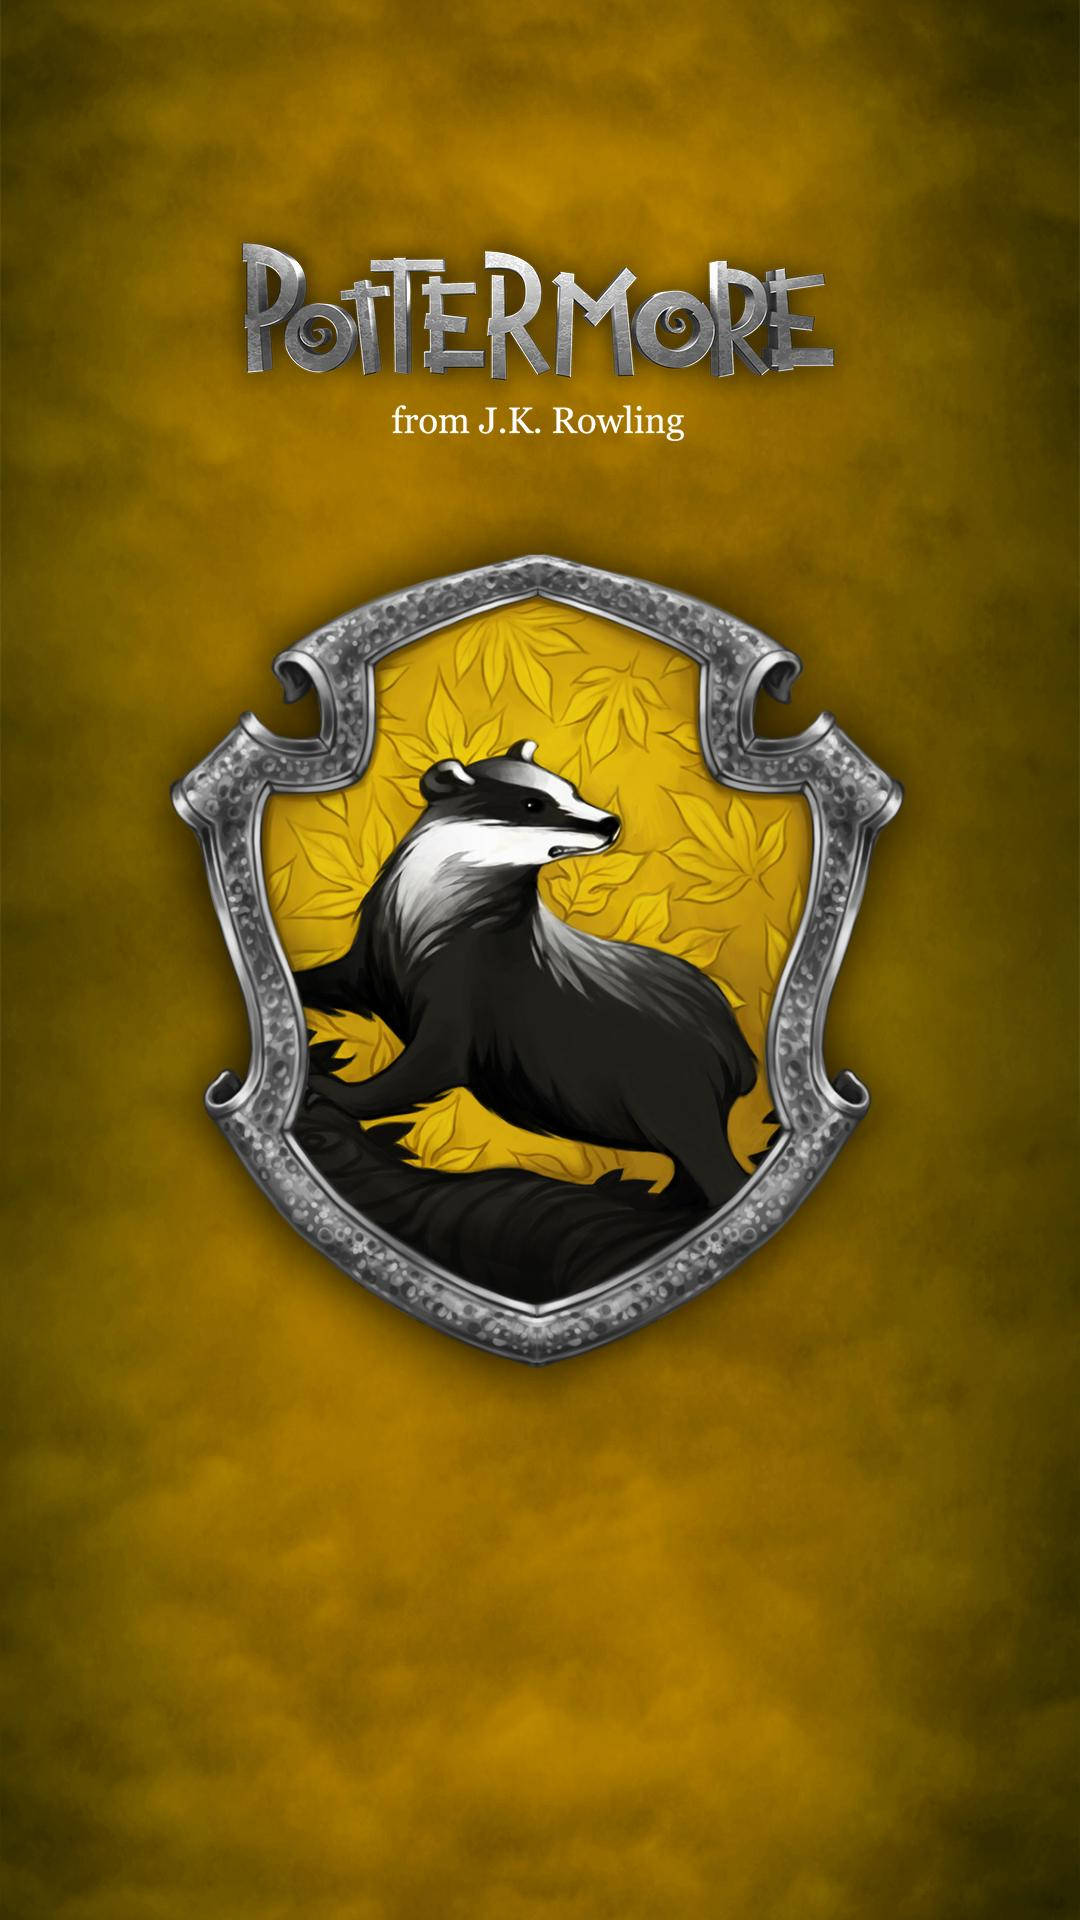 A Hufflepuff from Pottermore Wallpaper